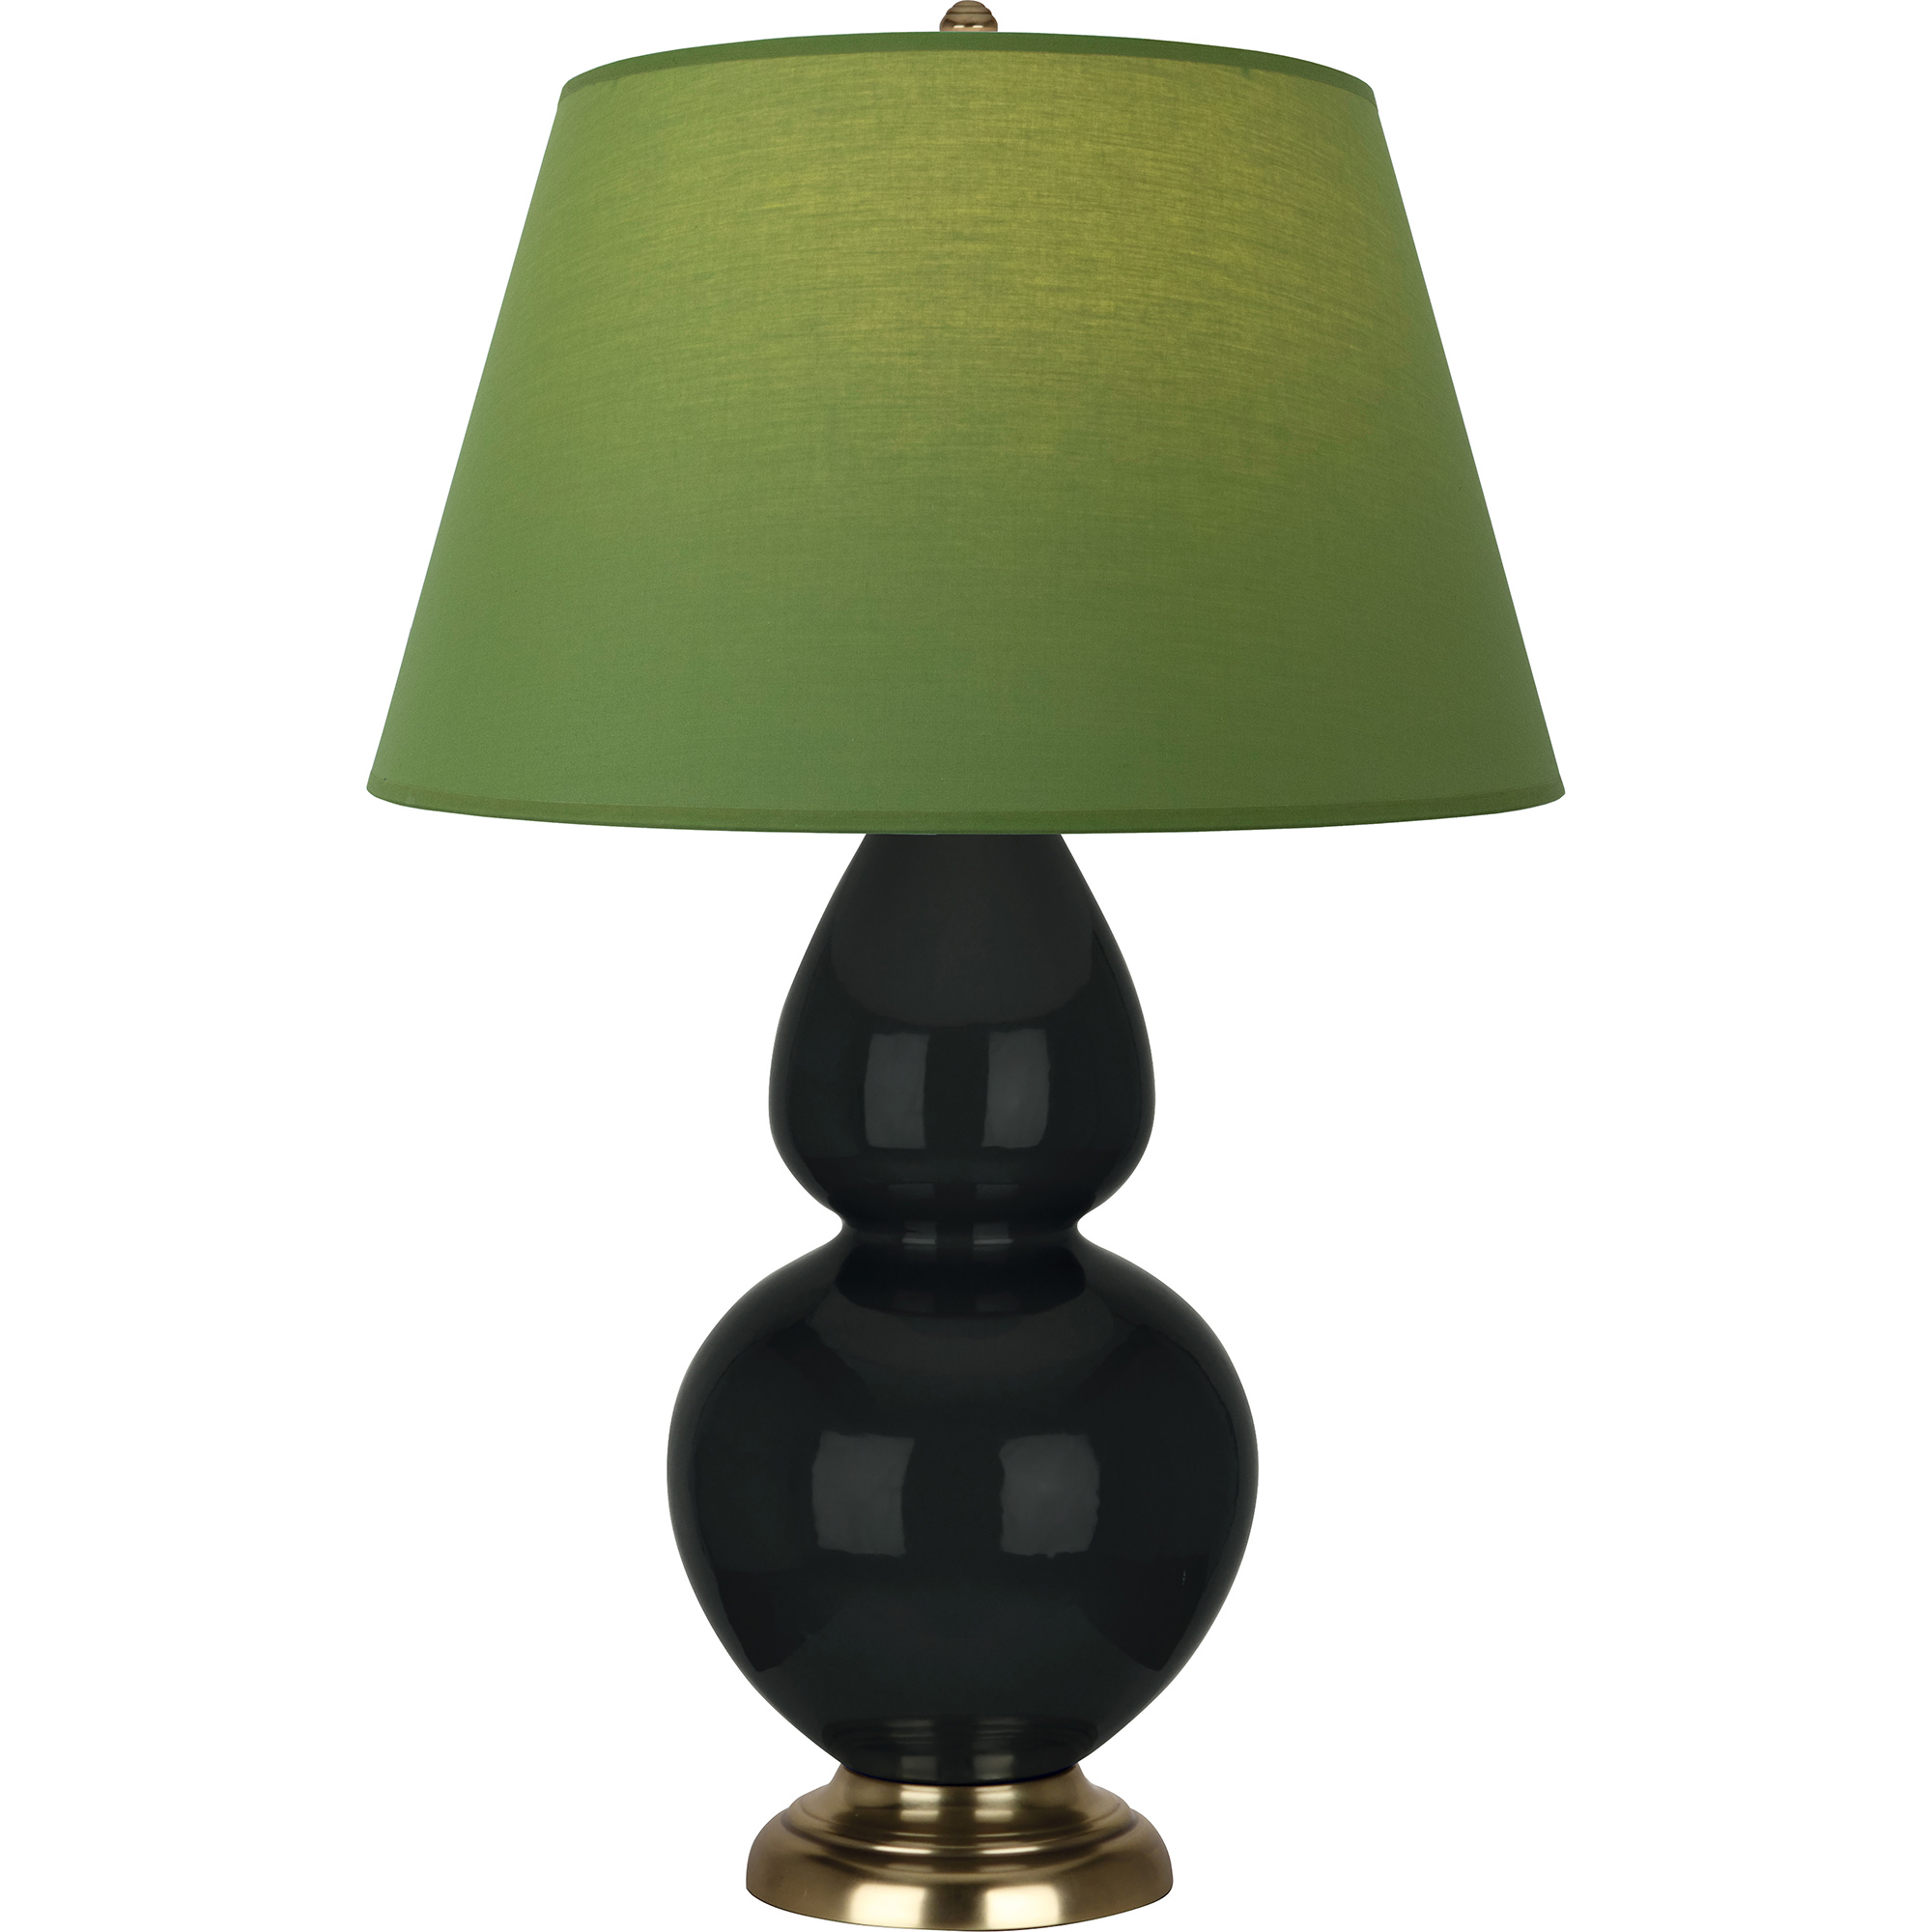 Double Gourd Table Lamp Style #OS20G